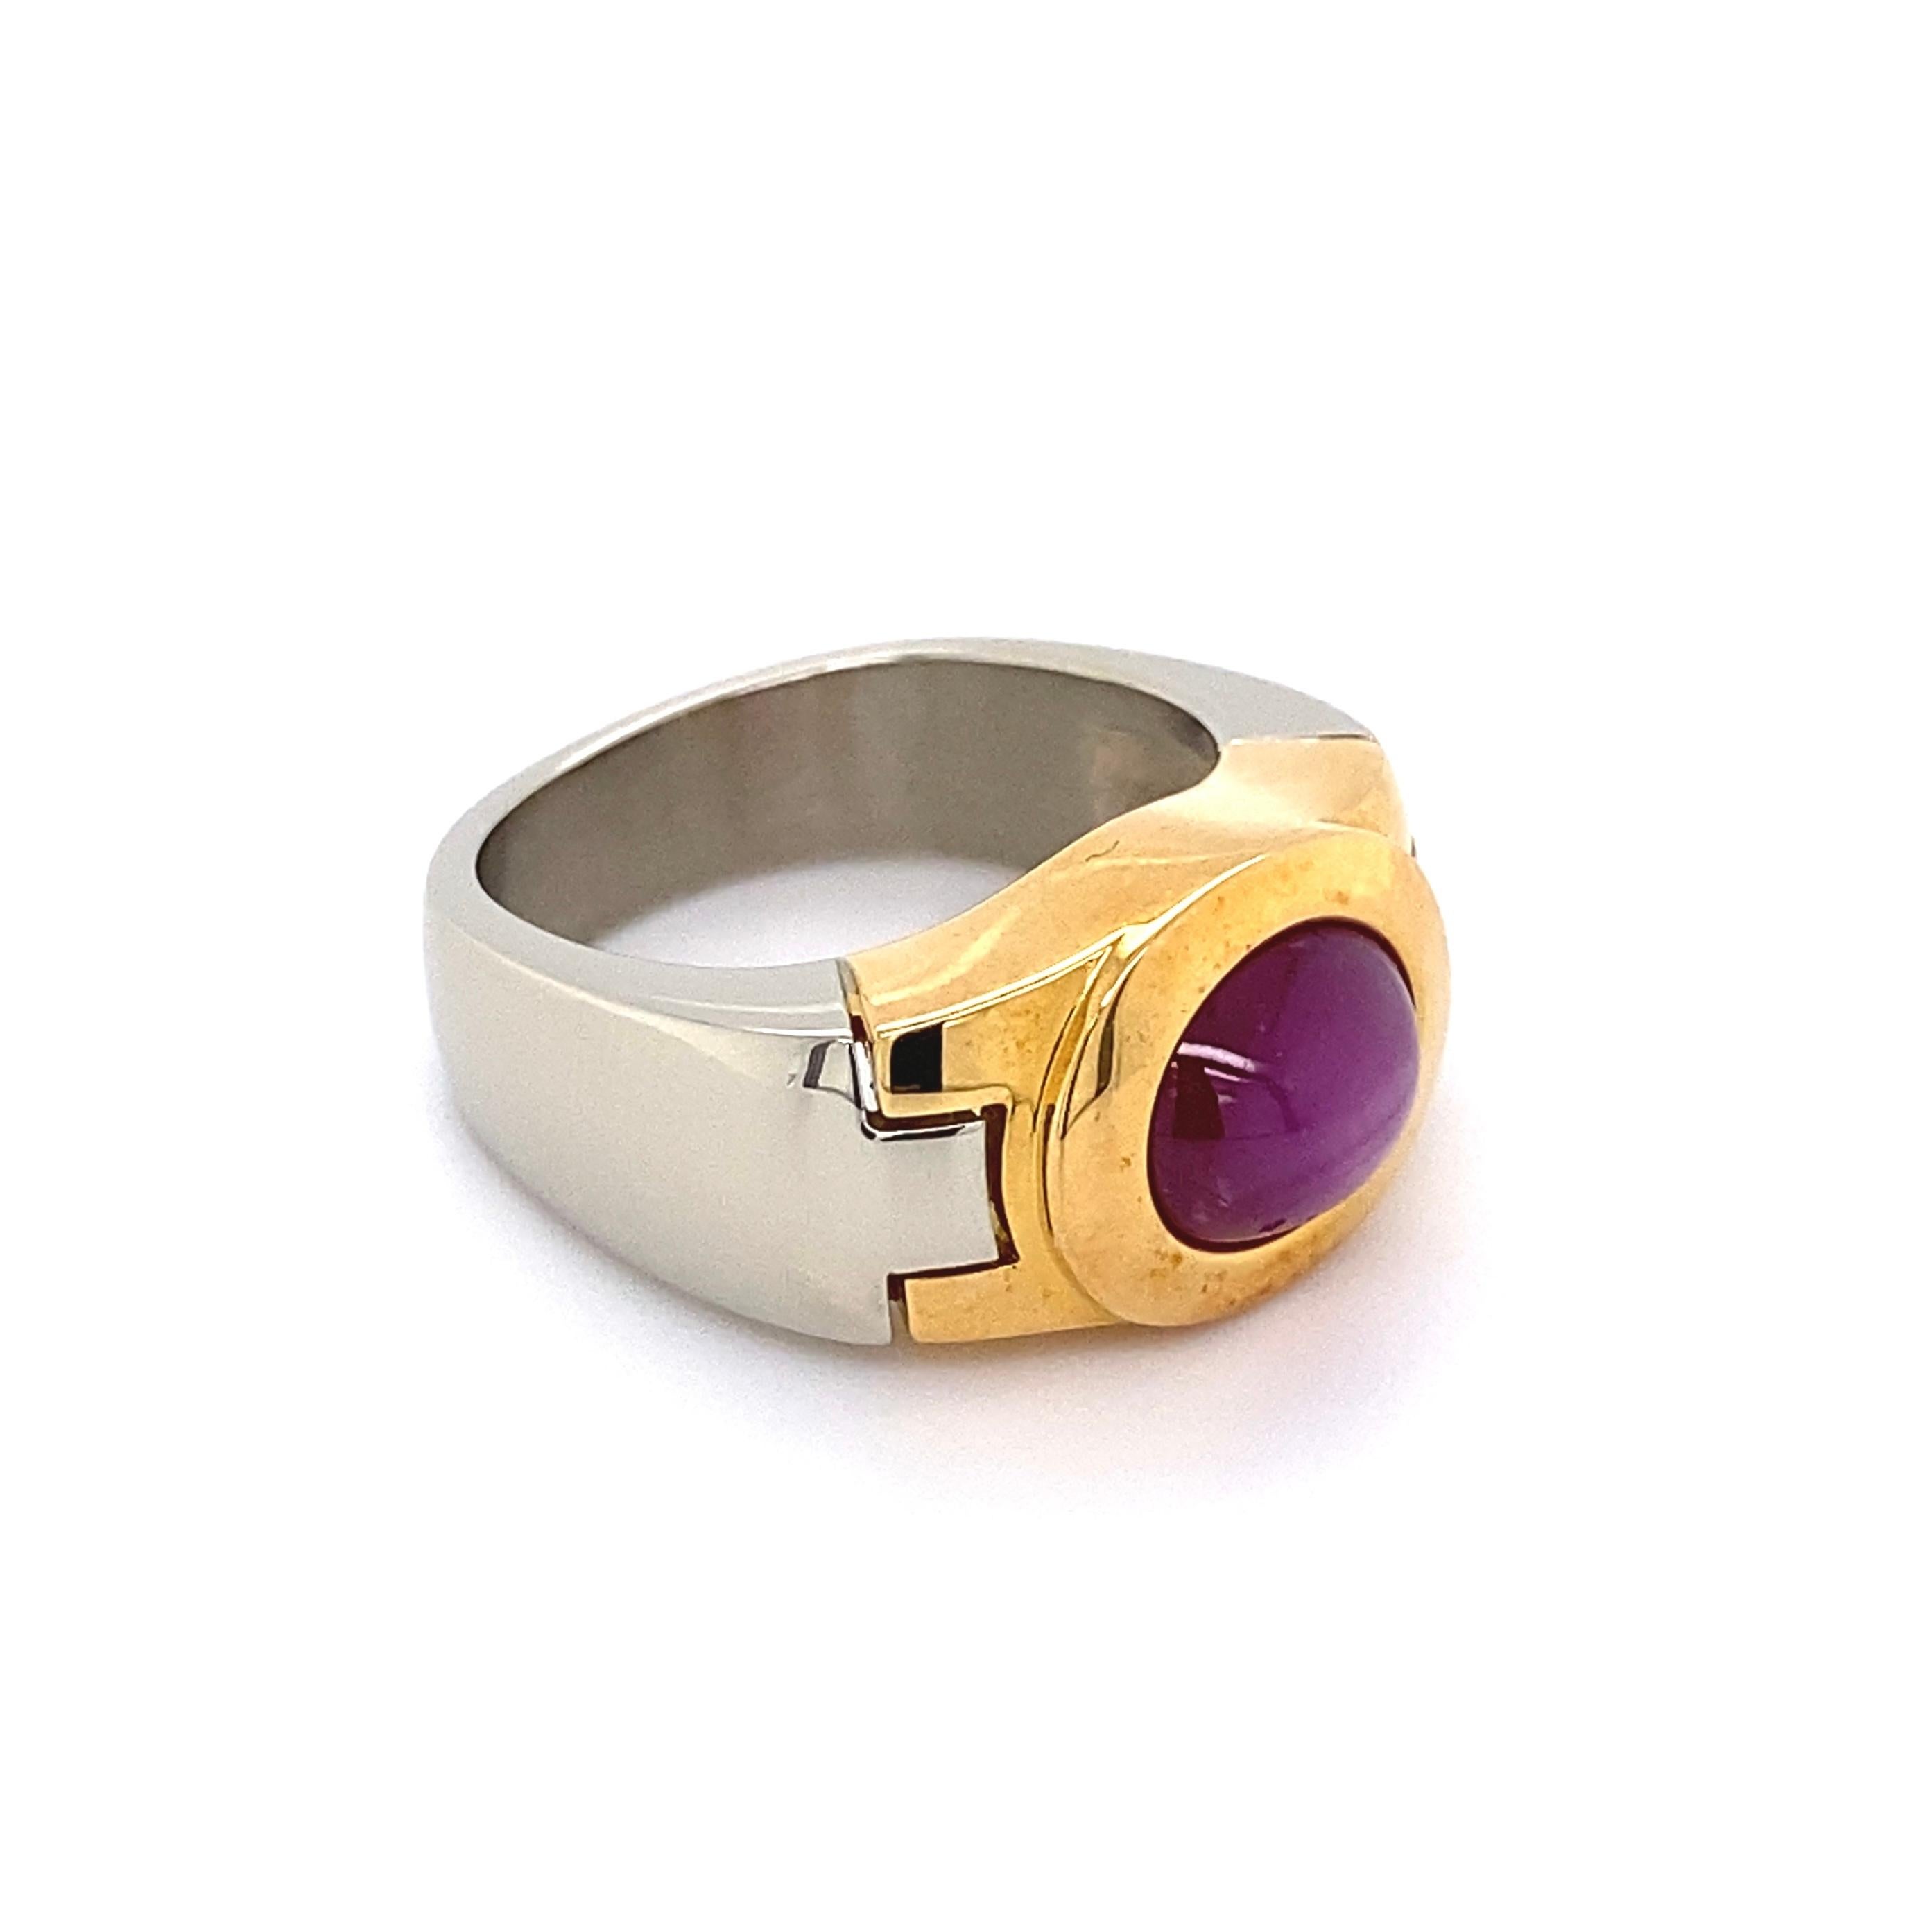 Handsome Gent’s NO HEAT 5 Carat Star Ruby Gold Signet Ring. Beautifully Hand crafted High Quality 2-tone 18 Karat Yellow and White Gold mounting. Measuring approx. 1.06” L x 0.87” W x 0.45” H. Ring size 7.25, we offer ring resizing. Accompanied by a